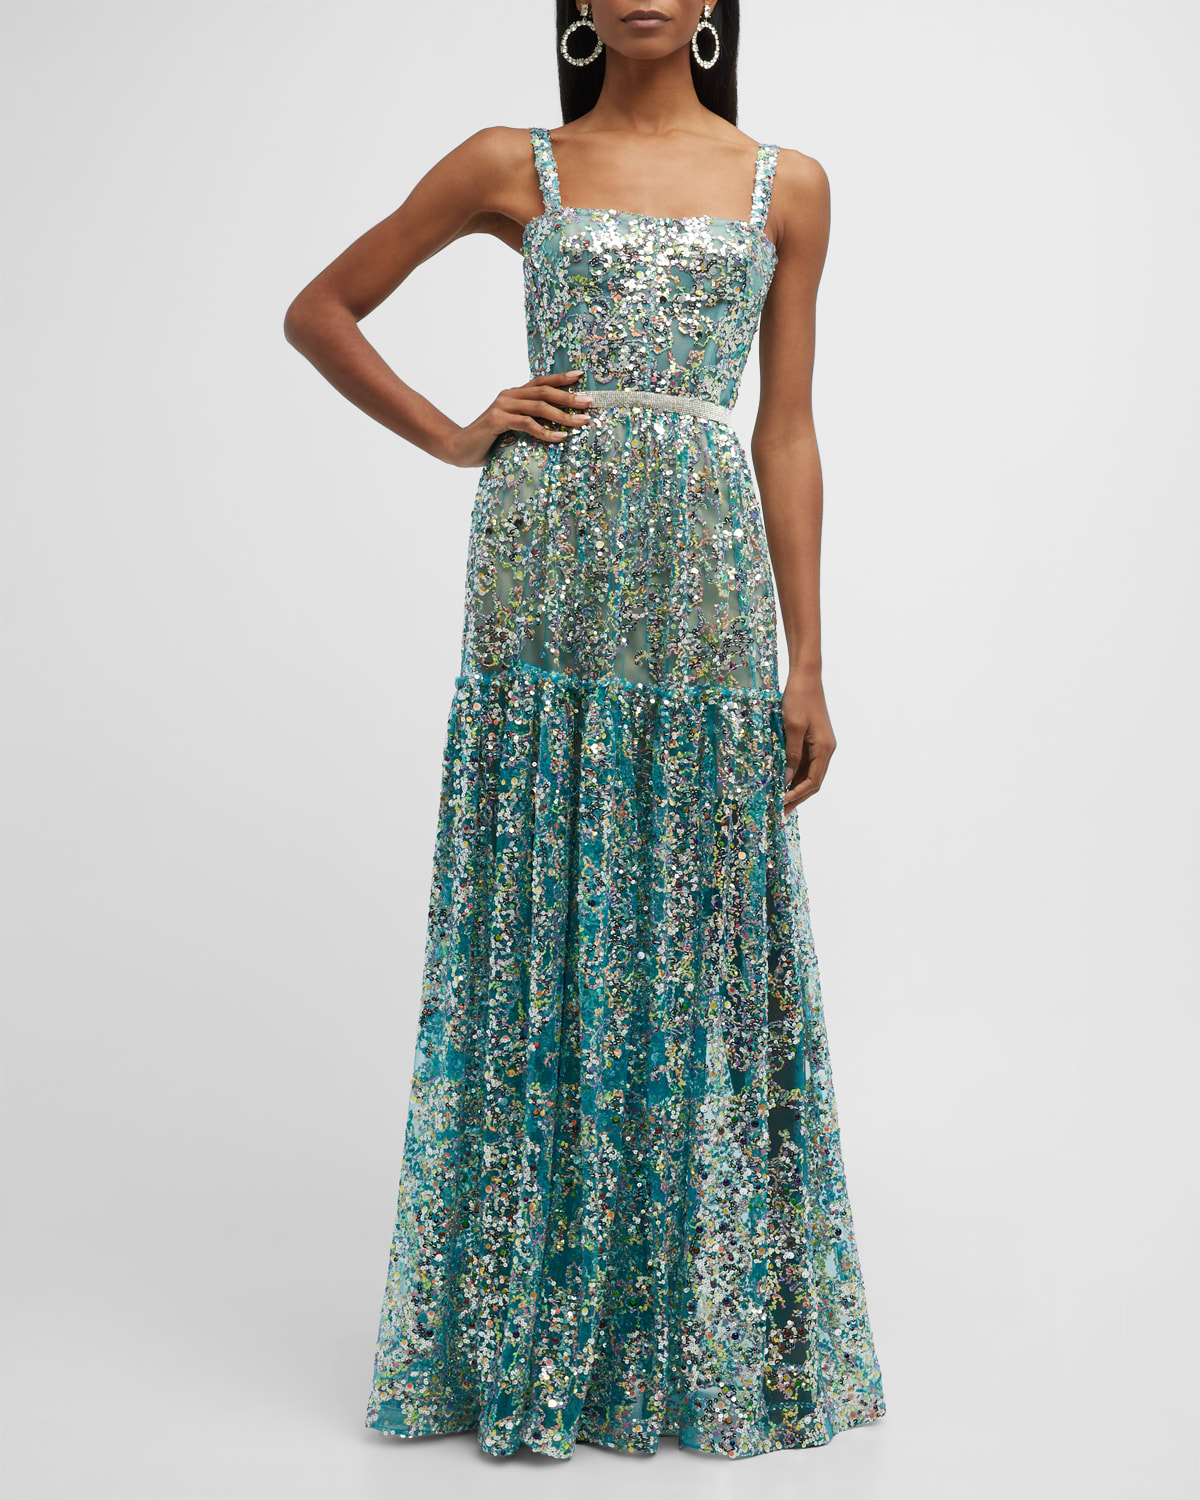 Midnite Sleeveless Sequin Gown